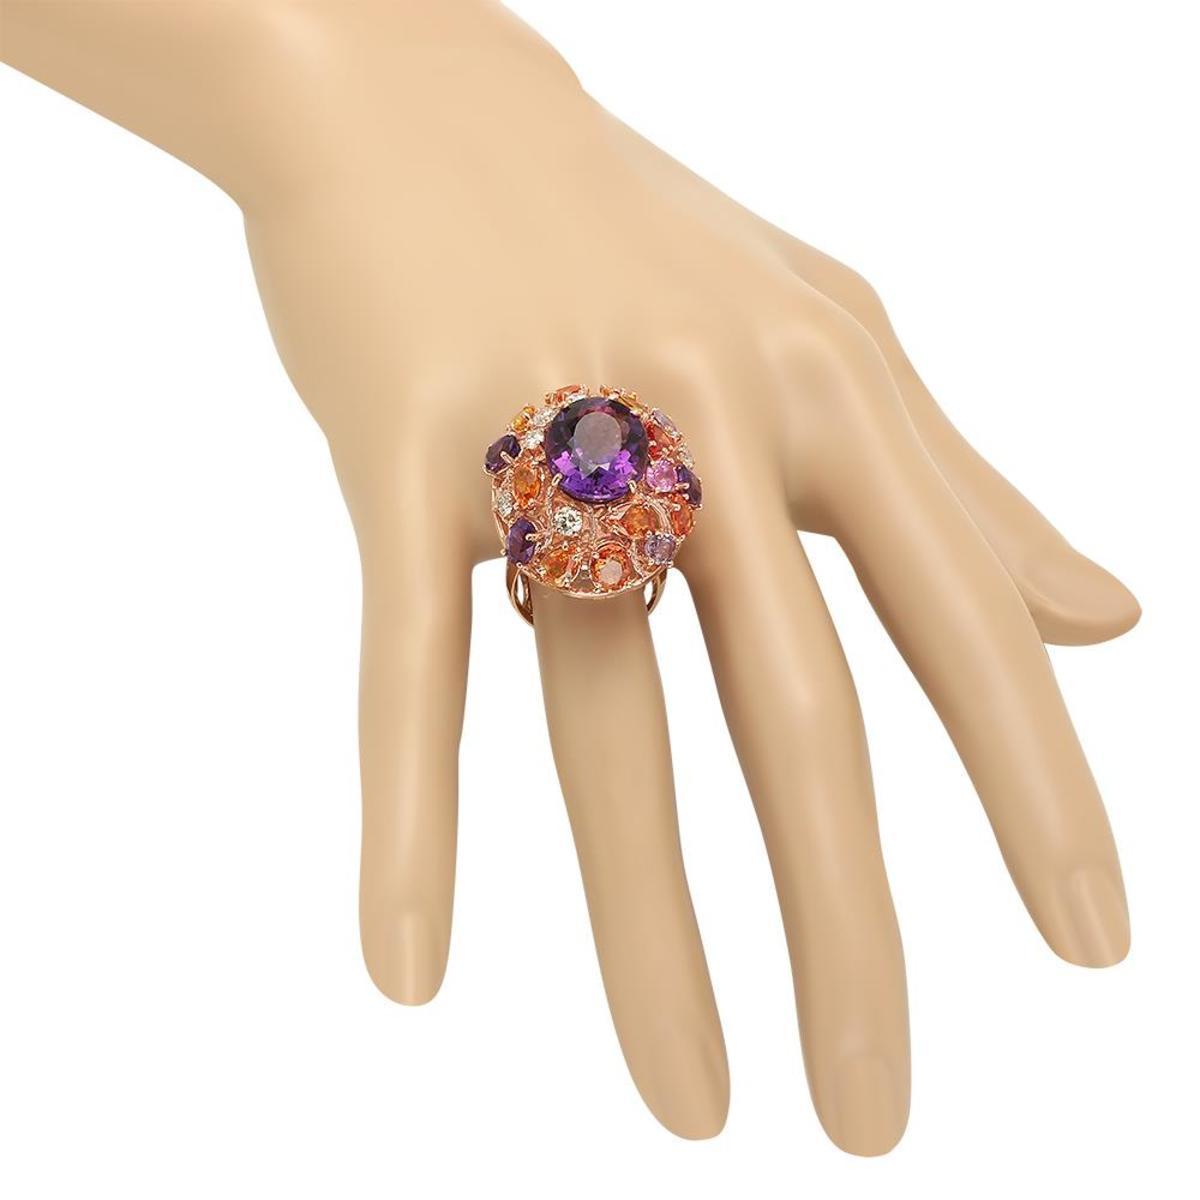 14K Rose Gold 8.55ct Amethyst 6.46ct Sapphire and 0.79ct Diamond Ring